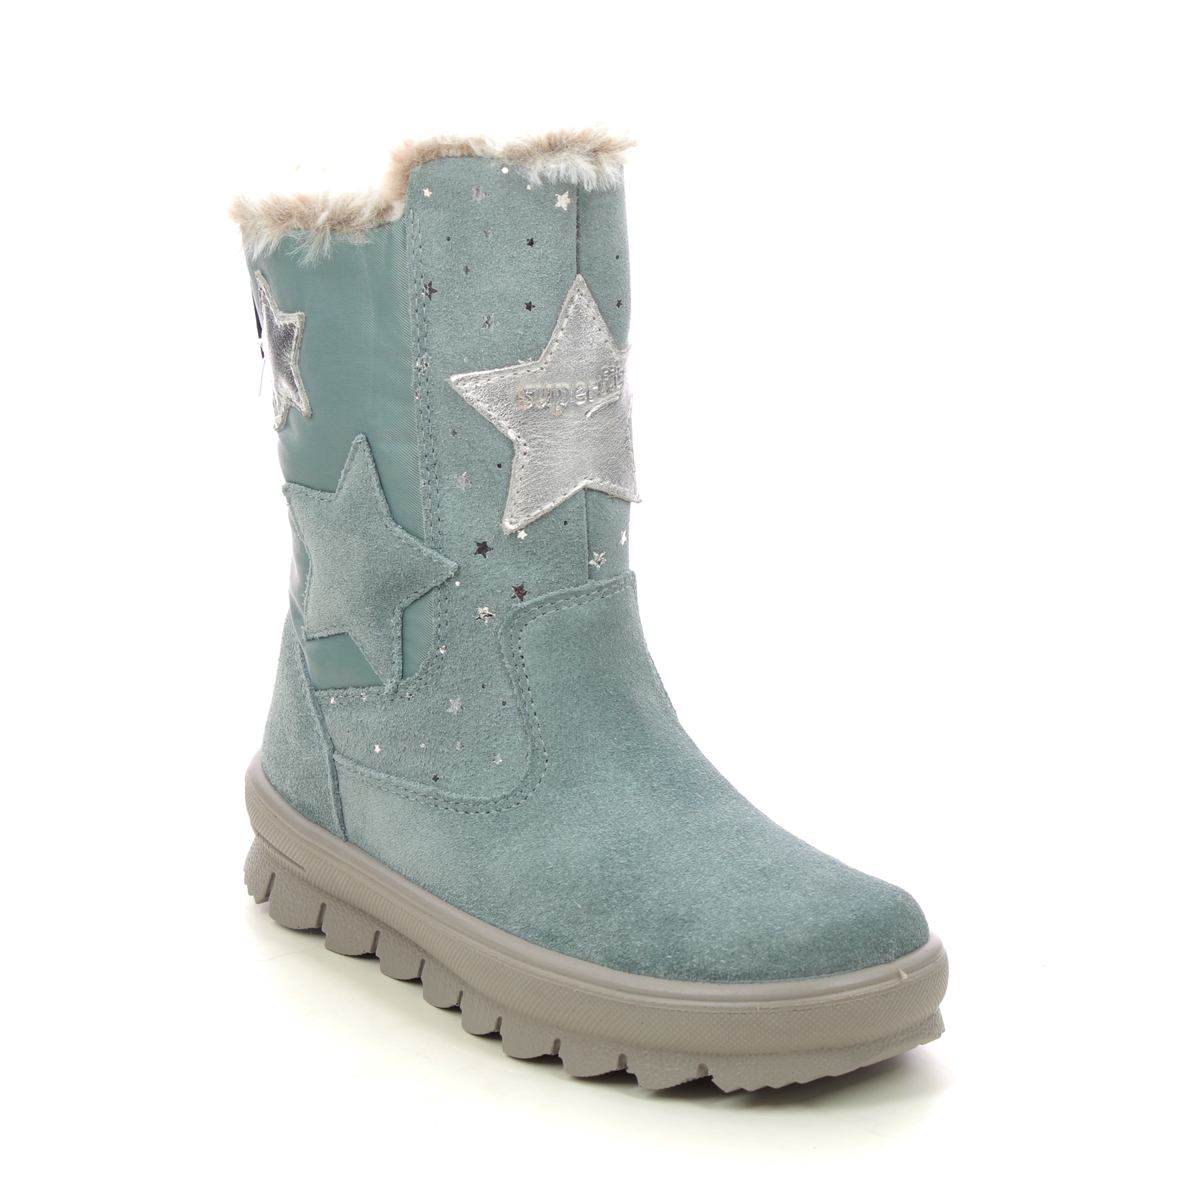 Superfit Flavia Star Gtx Blue Suede Kids Girls Boots 1000219-7500 In Size 26 In Plain Blue Suede For kids